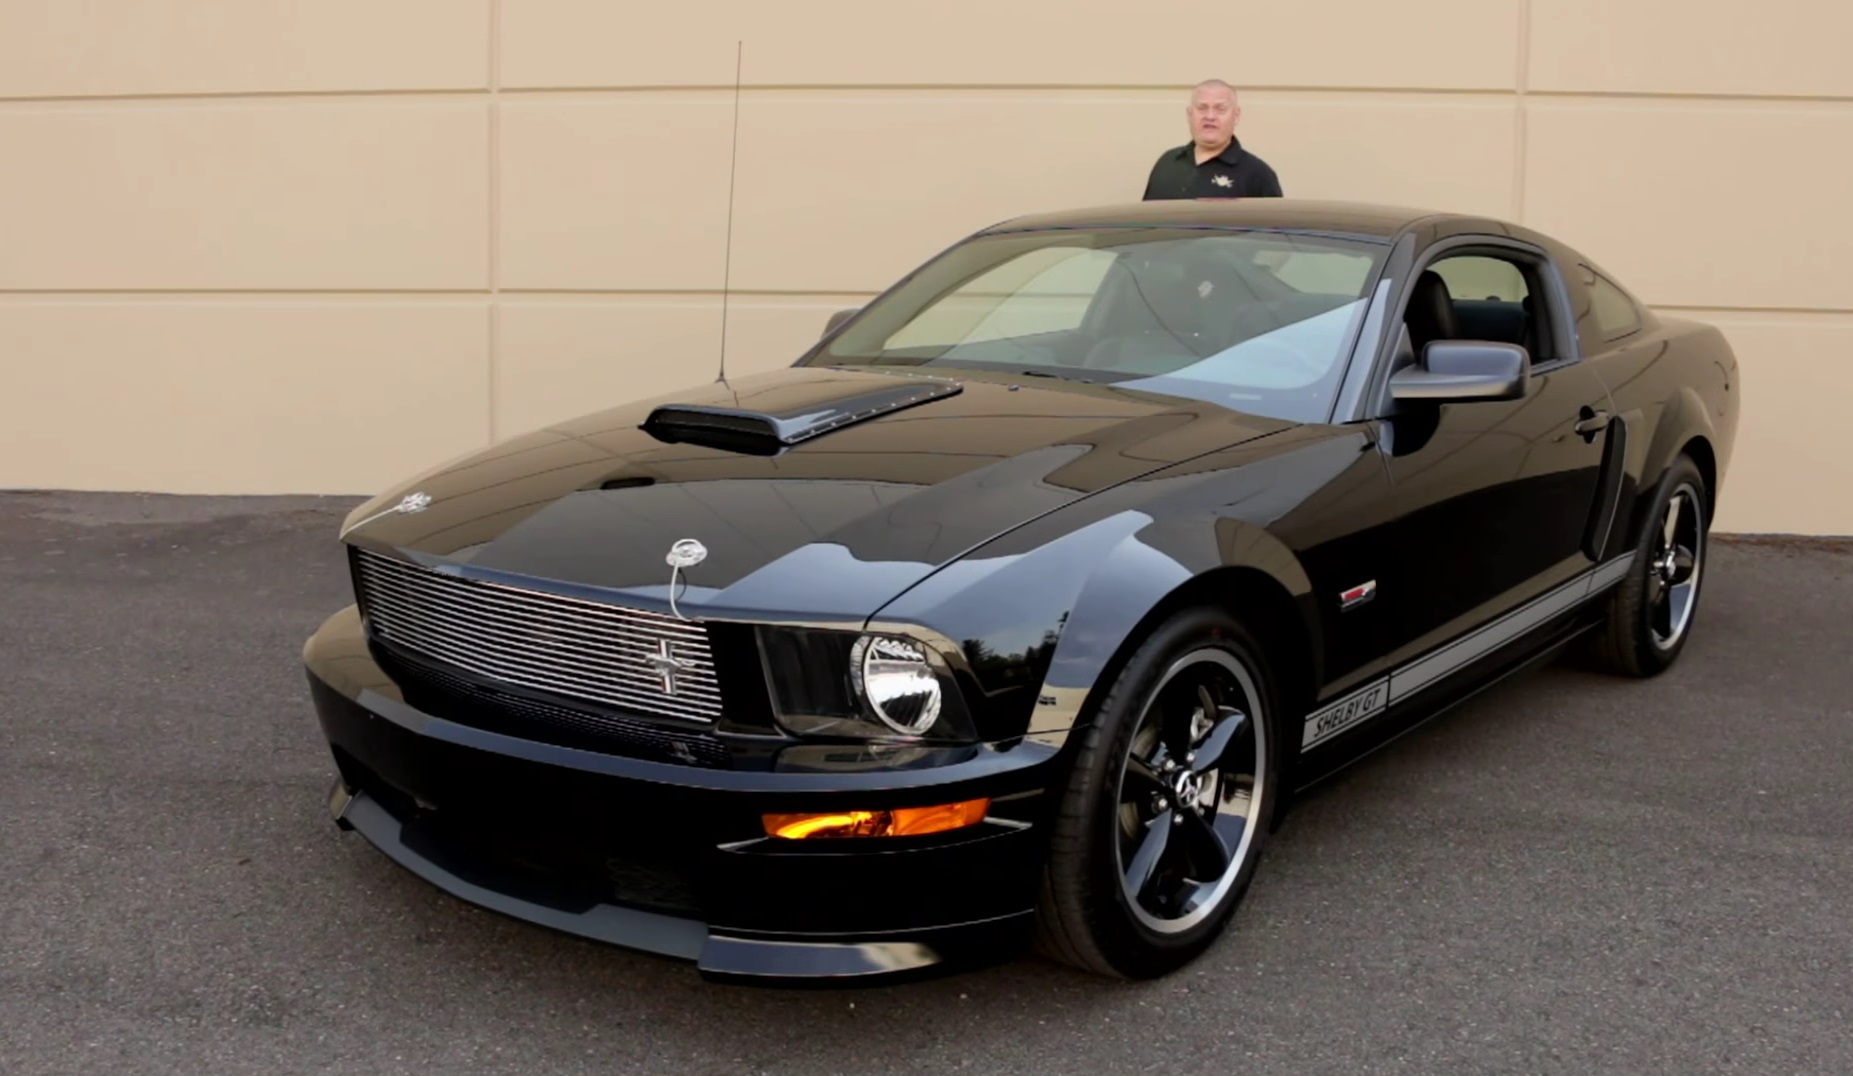 Video: 2007 Ford Mustang Shelby GT Muscle Car Overview